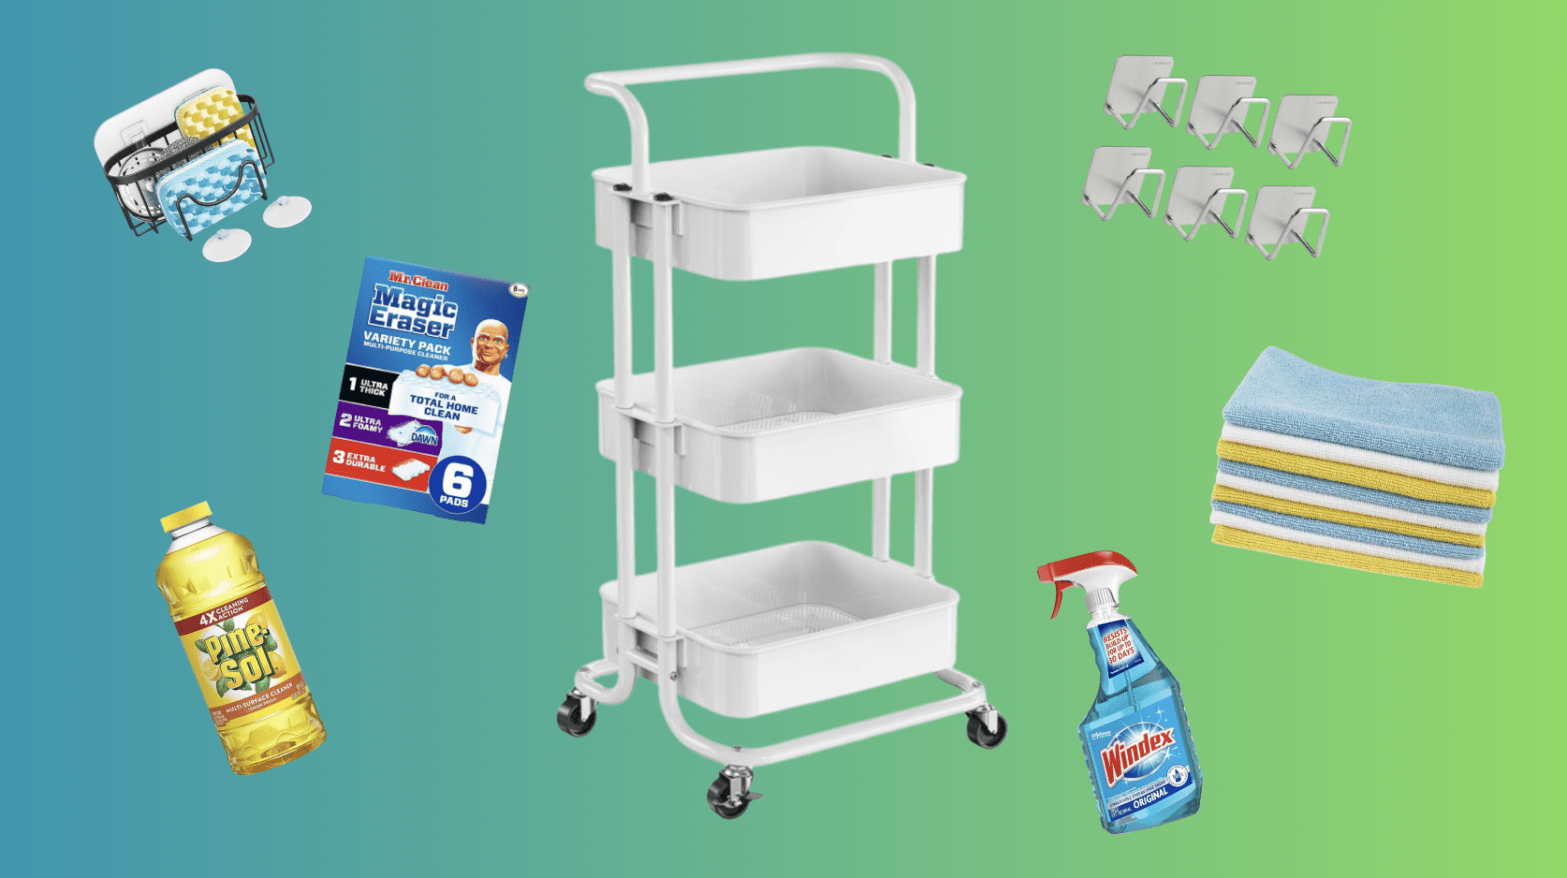 You Should Try This Popular Cart to Clean Up More Efficiently